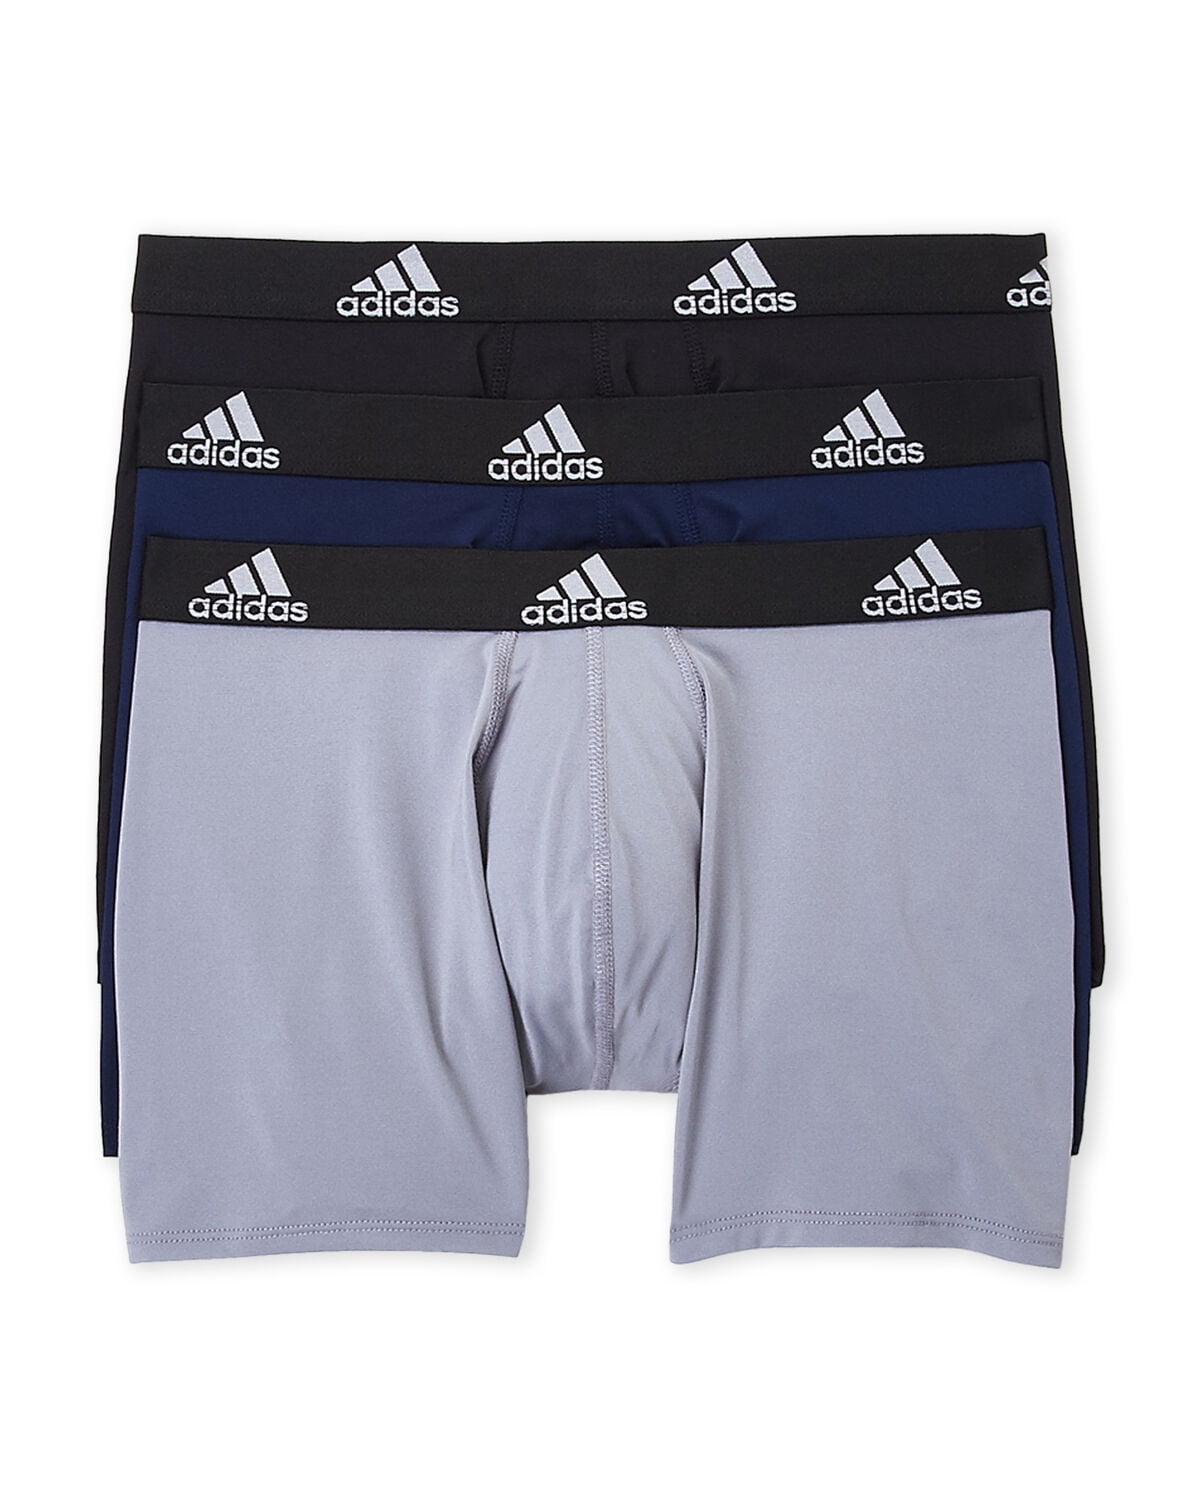 adidas men's climacool 7 midway briefs results